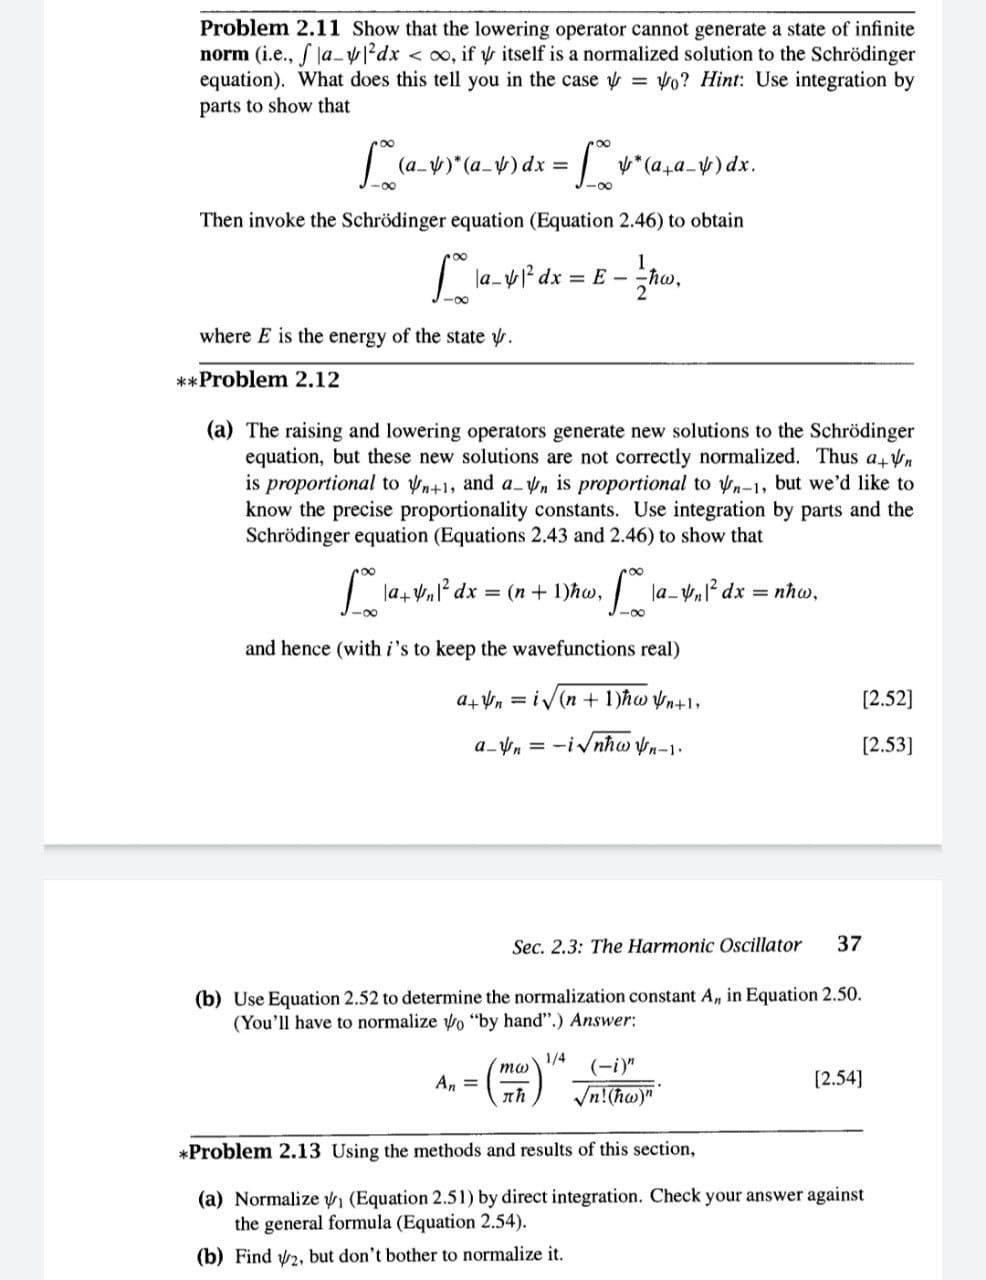 (a_)*(a_V)ax- J-o
Problem 2.11 Show that the lowering operator cannot generate a state of infinite
norm (i.e., f la.-²dx < oo, if y itself is a normalized solution to the Schrödinger
equation). What does this tell you in the case y = vo? Hint: Use integration by
parts to show that
y*(a,a_) dx.
=
-00
Then invoke the Schrödinger equation (Equation 2.46) to obtain
la-yl² dx E - hw,
-0-
where E is the energy of the state y.
**Problem 2.12
(a) The raising and lowering operators generate new solutions to the Schrödinger
equation, but these new solutions are not correctly normalized. Thus a Vn
is proportional to yn+1, and a n is proportional to yn-1, but we'd like to
know the precise proportionality constants. Use integration by parts and the
Schrödinger equation (Equations 2.43 and 2.46) to show that
roo
| la+ Vl² dx = (n+ 1)hw,
la- Vnl? dx = nhw,
-00
-00
and hence (with i's to keep the wavefunctions real)
a+ Vn = iv(n + 1)hw yn+1,
[2.52]
a_n = -ivnhw n-1.
[2.53]
Sec. 2.3: The Harmonic Oscillator
37
(b) Use Equation 2.52 to determine the normalization constant A, in Equation 2.50.
(You'll have to normalize o "by hand".) Answer:
1/4
(-i)"
An =
[2.54]
Vn!(hw)"
*Problem 2.13 Using the methods and results of this section,
(a) Normalize n (Equation 2.51) by direct integration. Check your answer against
the general formula (Equation 2.54).
(b) Find 2, but don't bother to normalize it.
